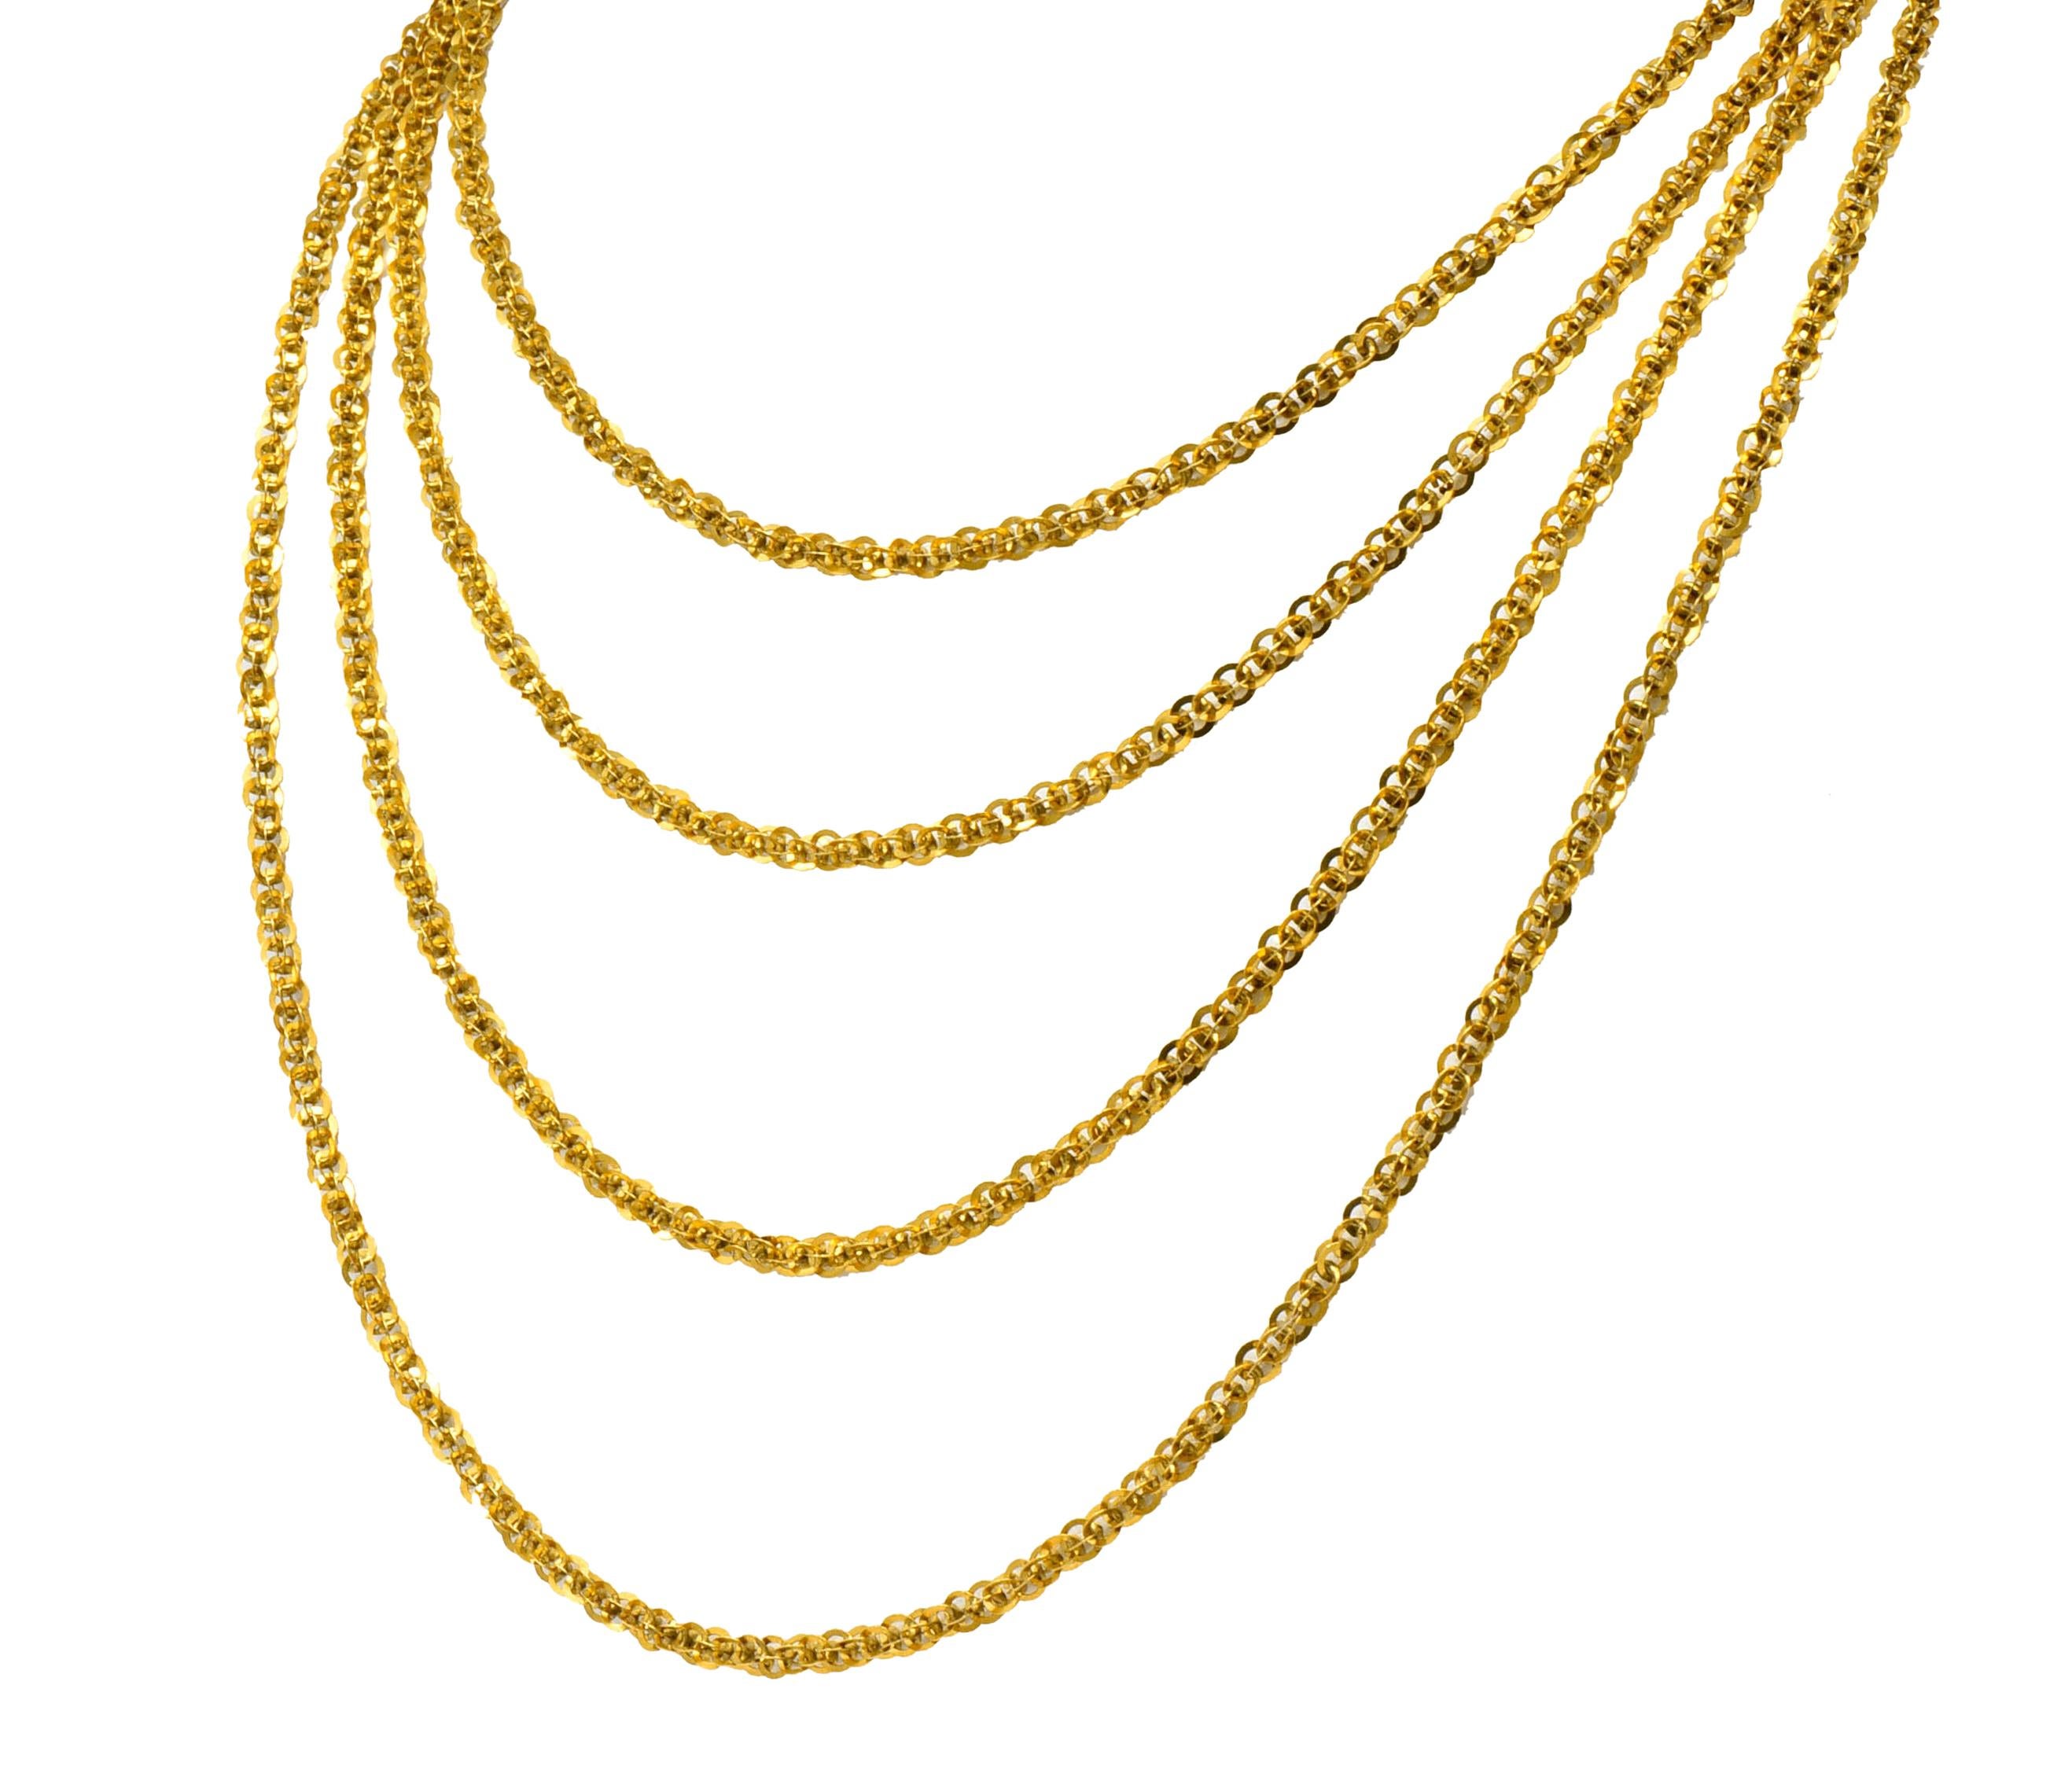 Featuring interlocking, conjoined, circled links

Marked with Continental hallmarks and tested as 19 karat gold

Circa 1900

Length: 88 inches

Width: 3.4 mm 

Total Weight: 37.4 grams

Elegant. Well-Crafted. Layering. 
 

Stock Number: We-3866